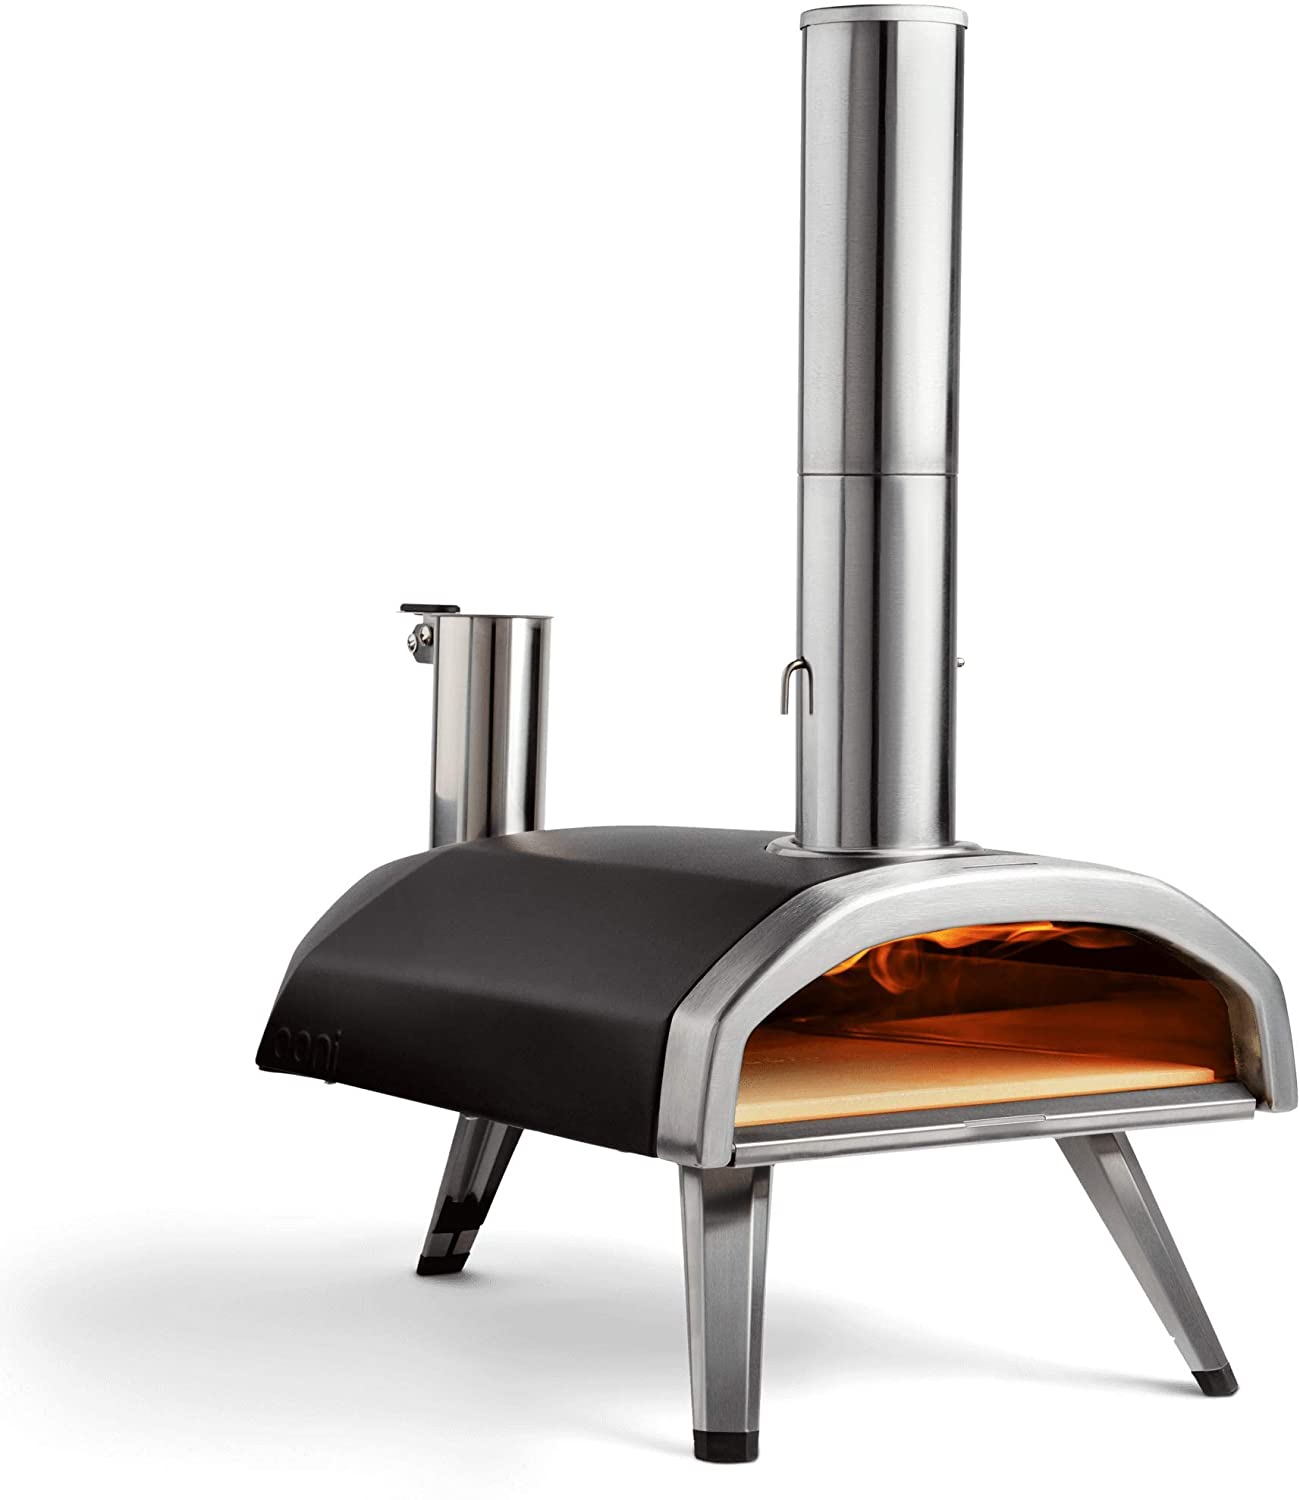 Ooni Fyra 12 Wood Fired Outdoor Pizza Oven – Portable Hard Wood Pellet Pizza Oven